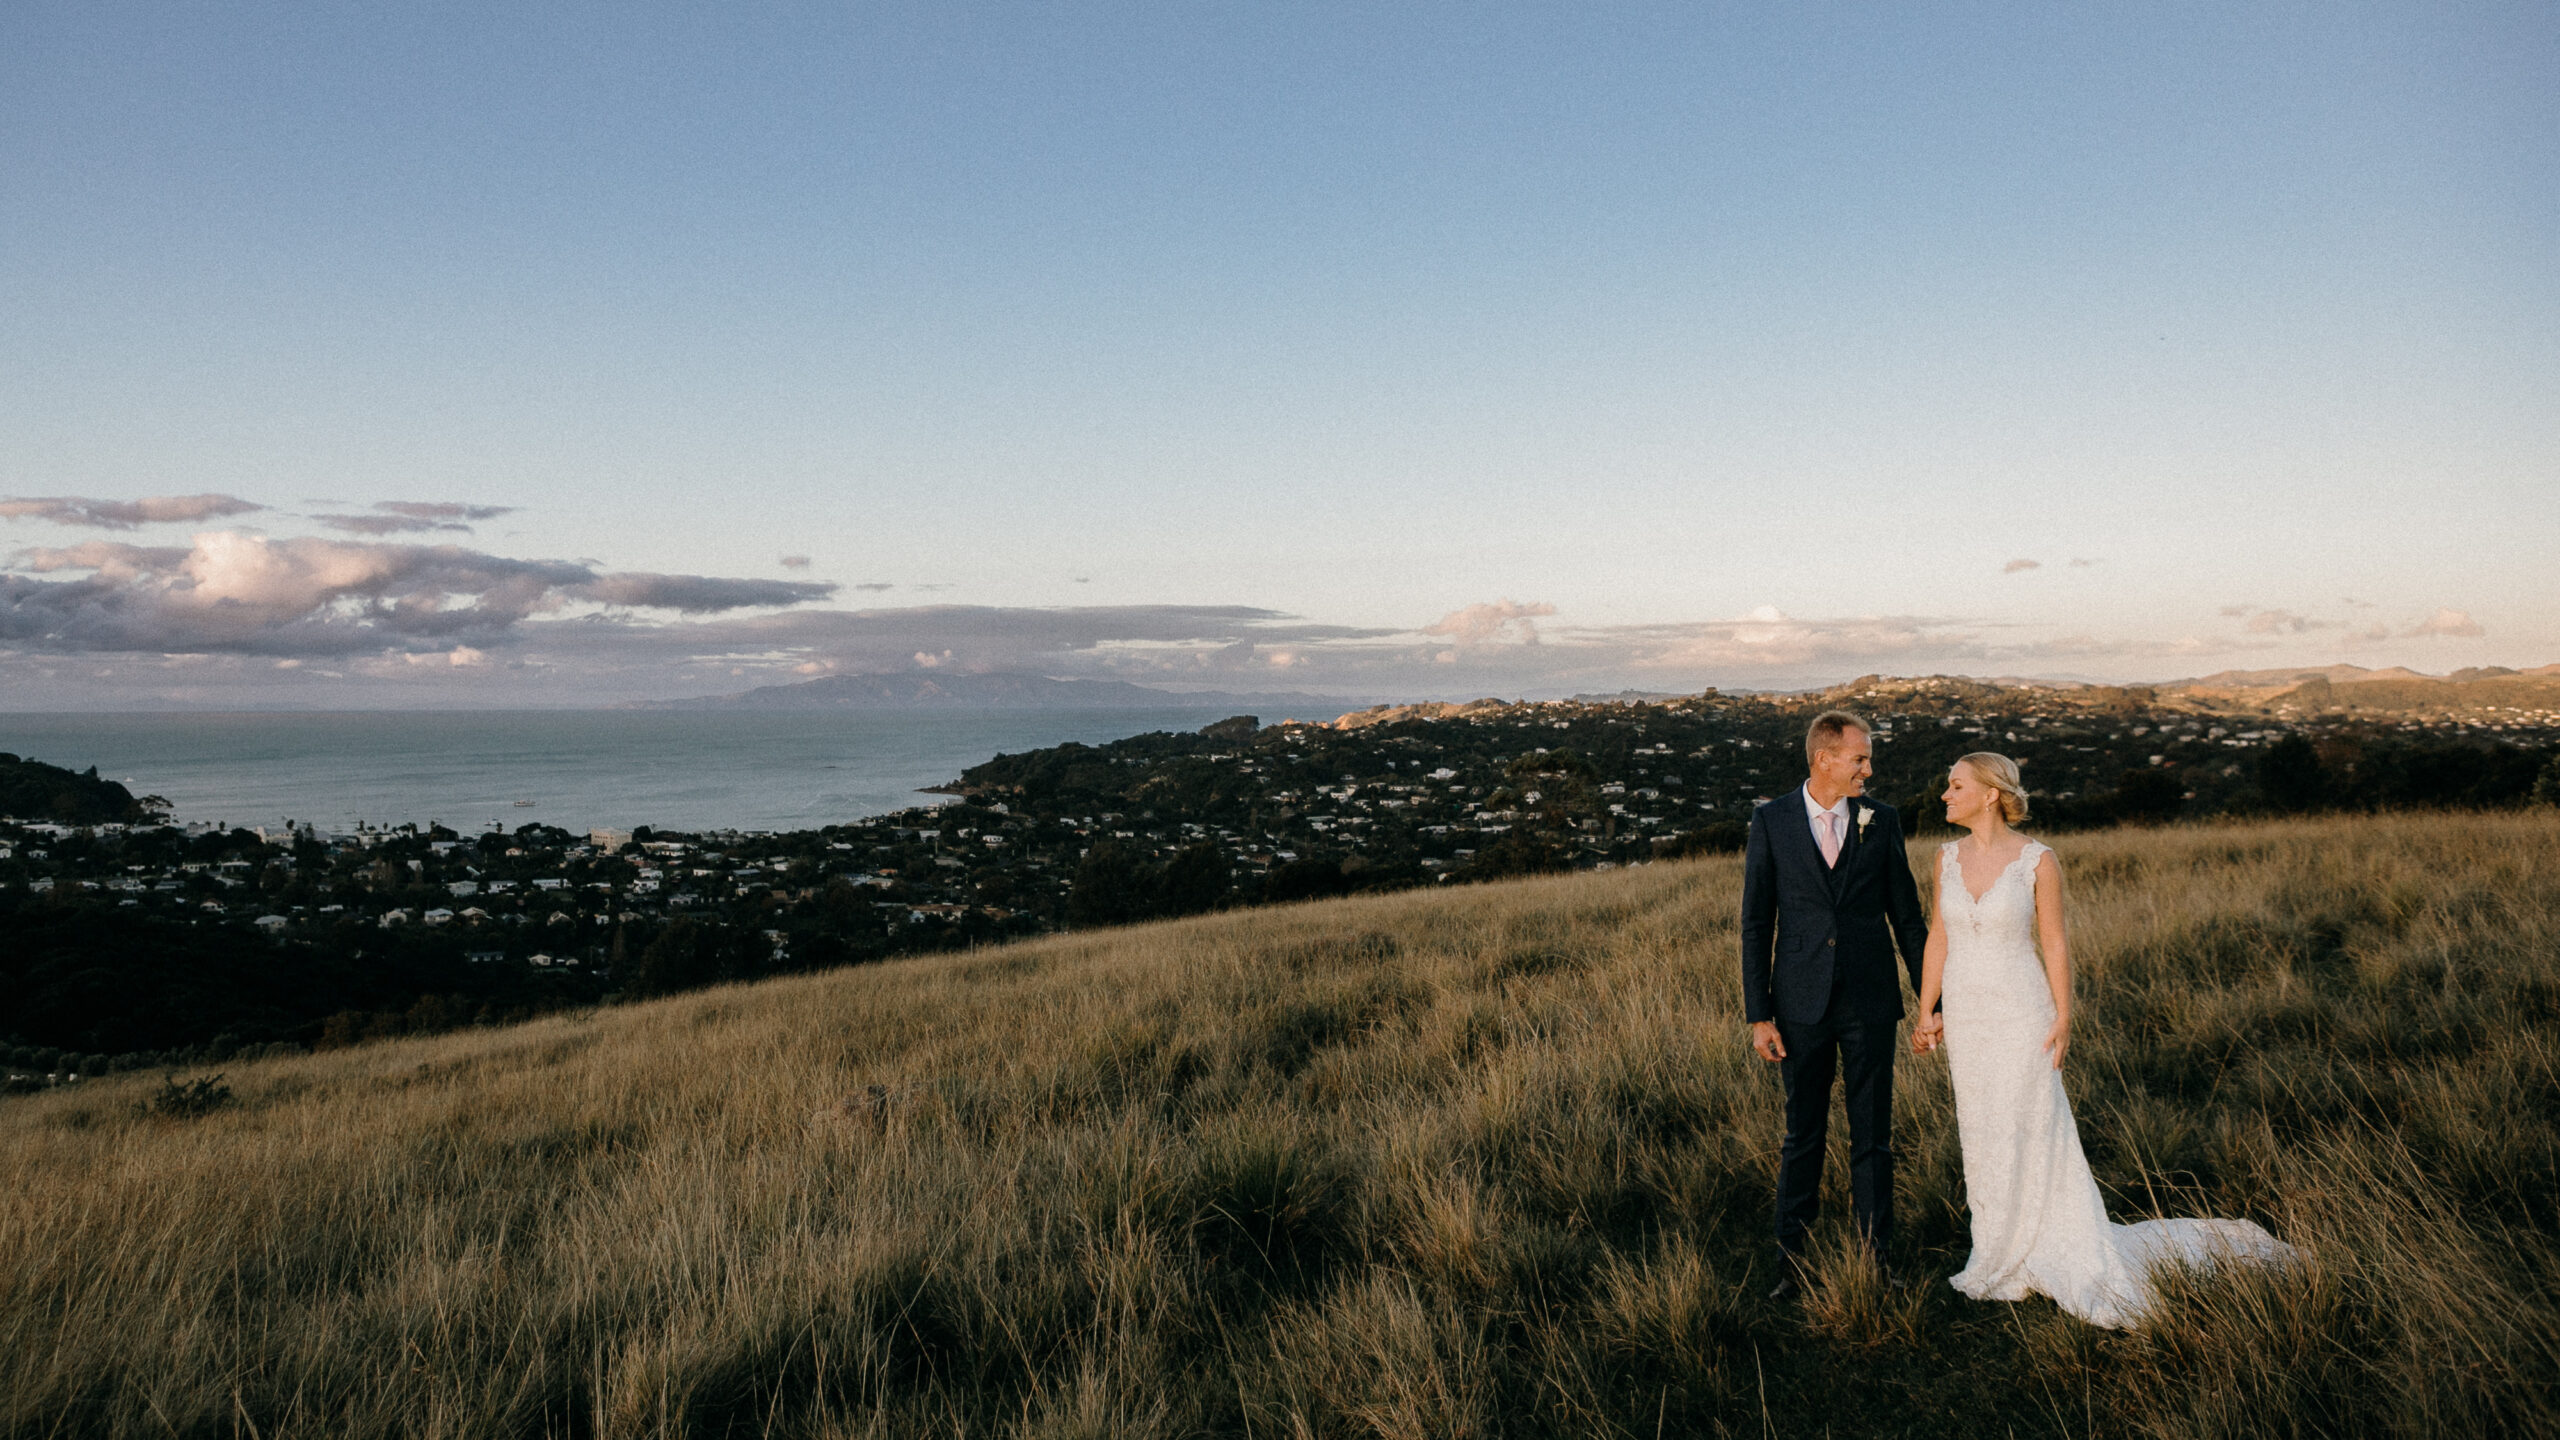 Bride and Groom wedding photos ontop hill in long grass with view of ocean at Mudbrick Waiheke Island Auckland, photo by Sarah Weber Photography